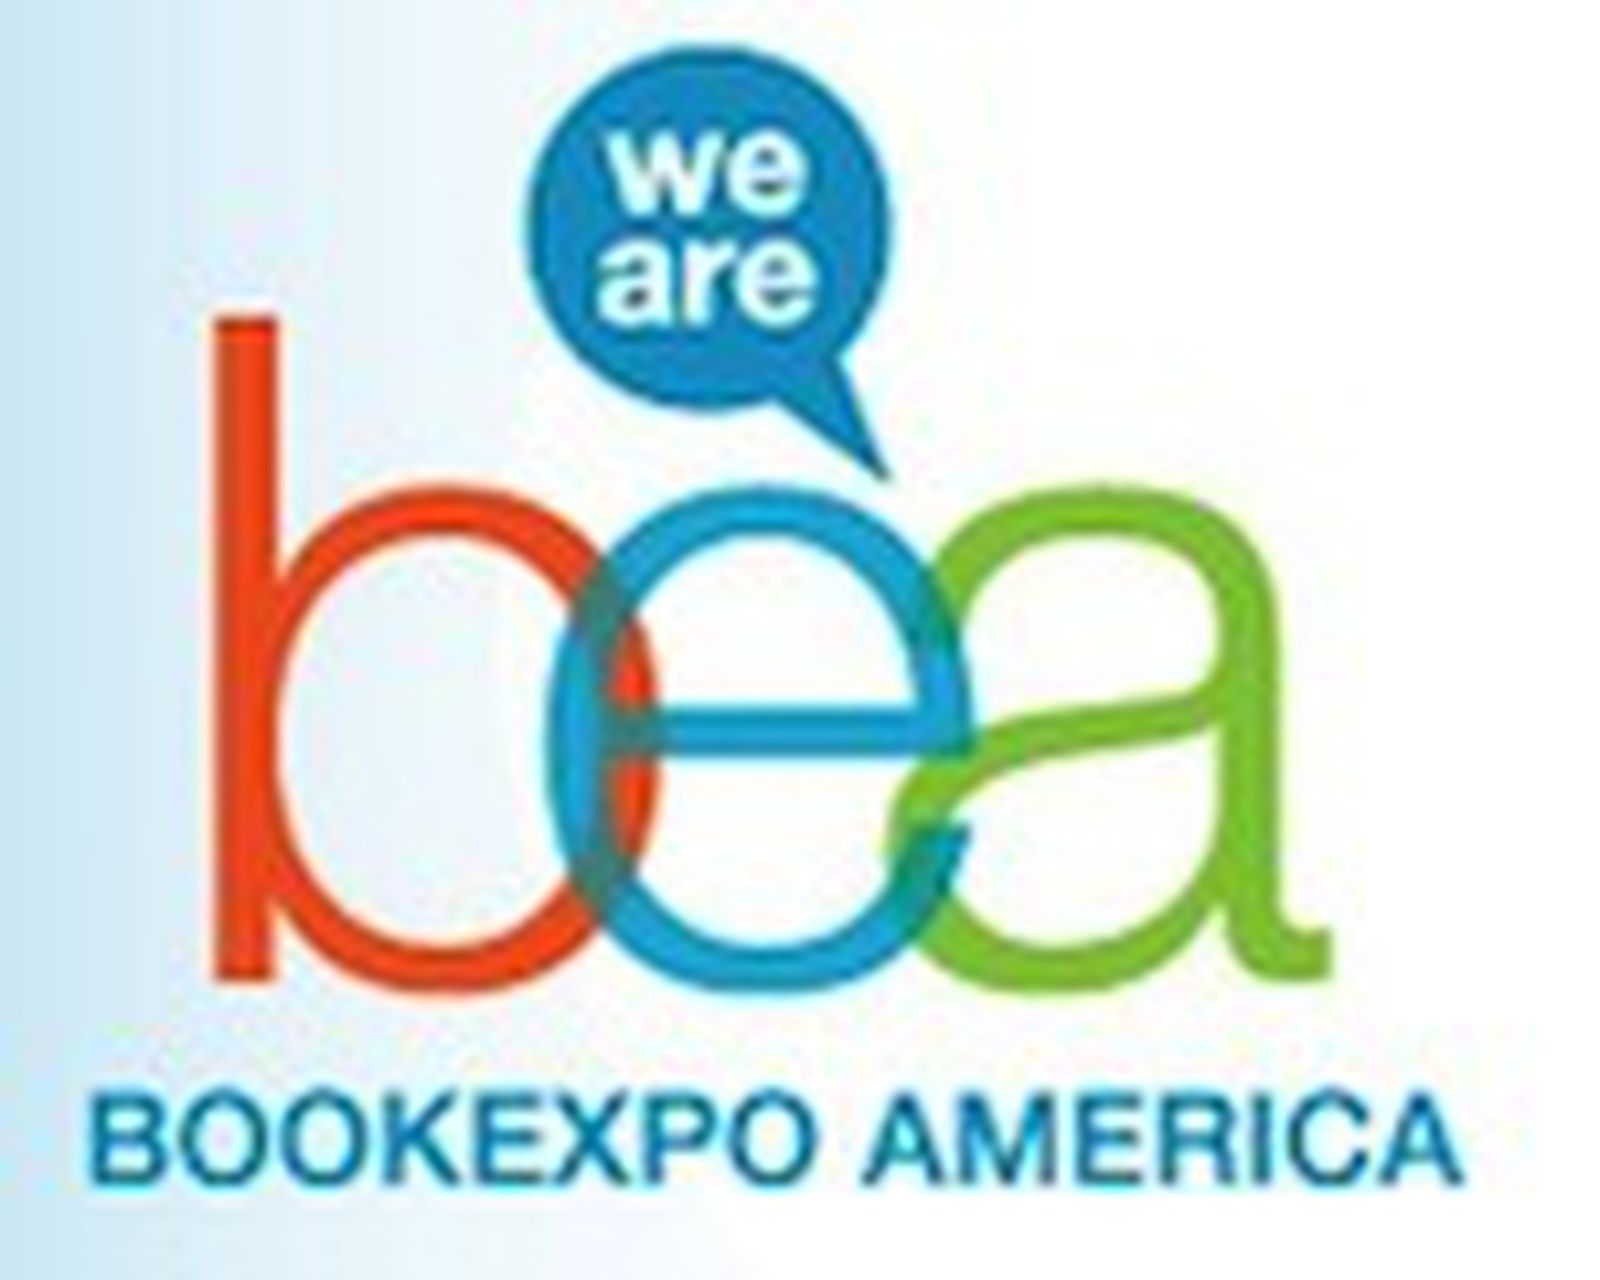 Apple Raising iBookstore Visibility by Exhibiting at BookExpo America